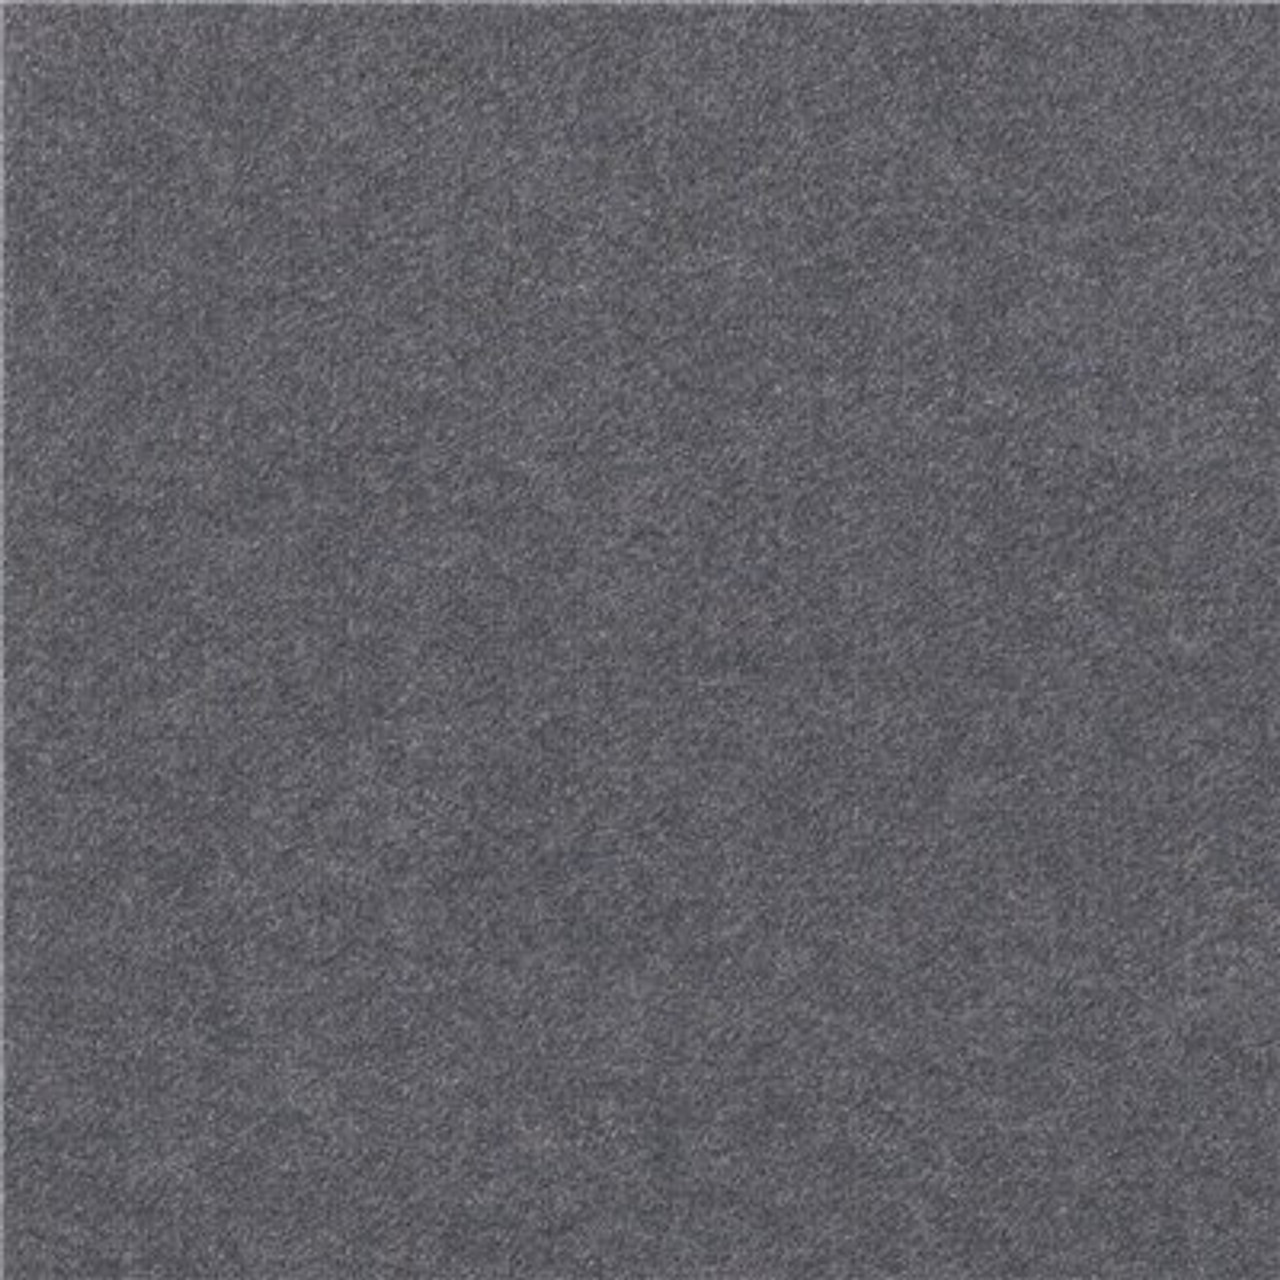 Foss Peel And Stick First Impressions Flat Denim 24 In. X 24 In. Commercial Carpet Tile (15 Tiles/Case)